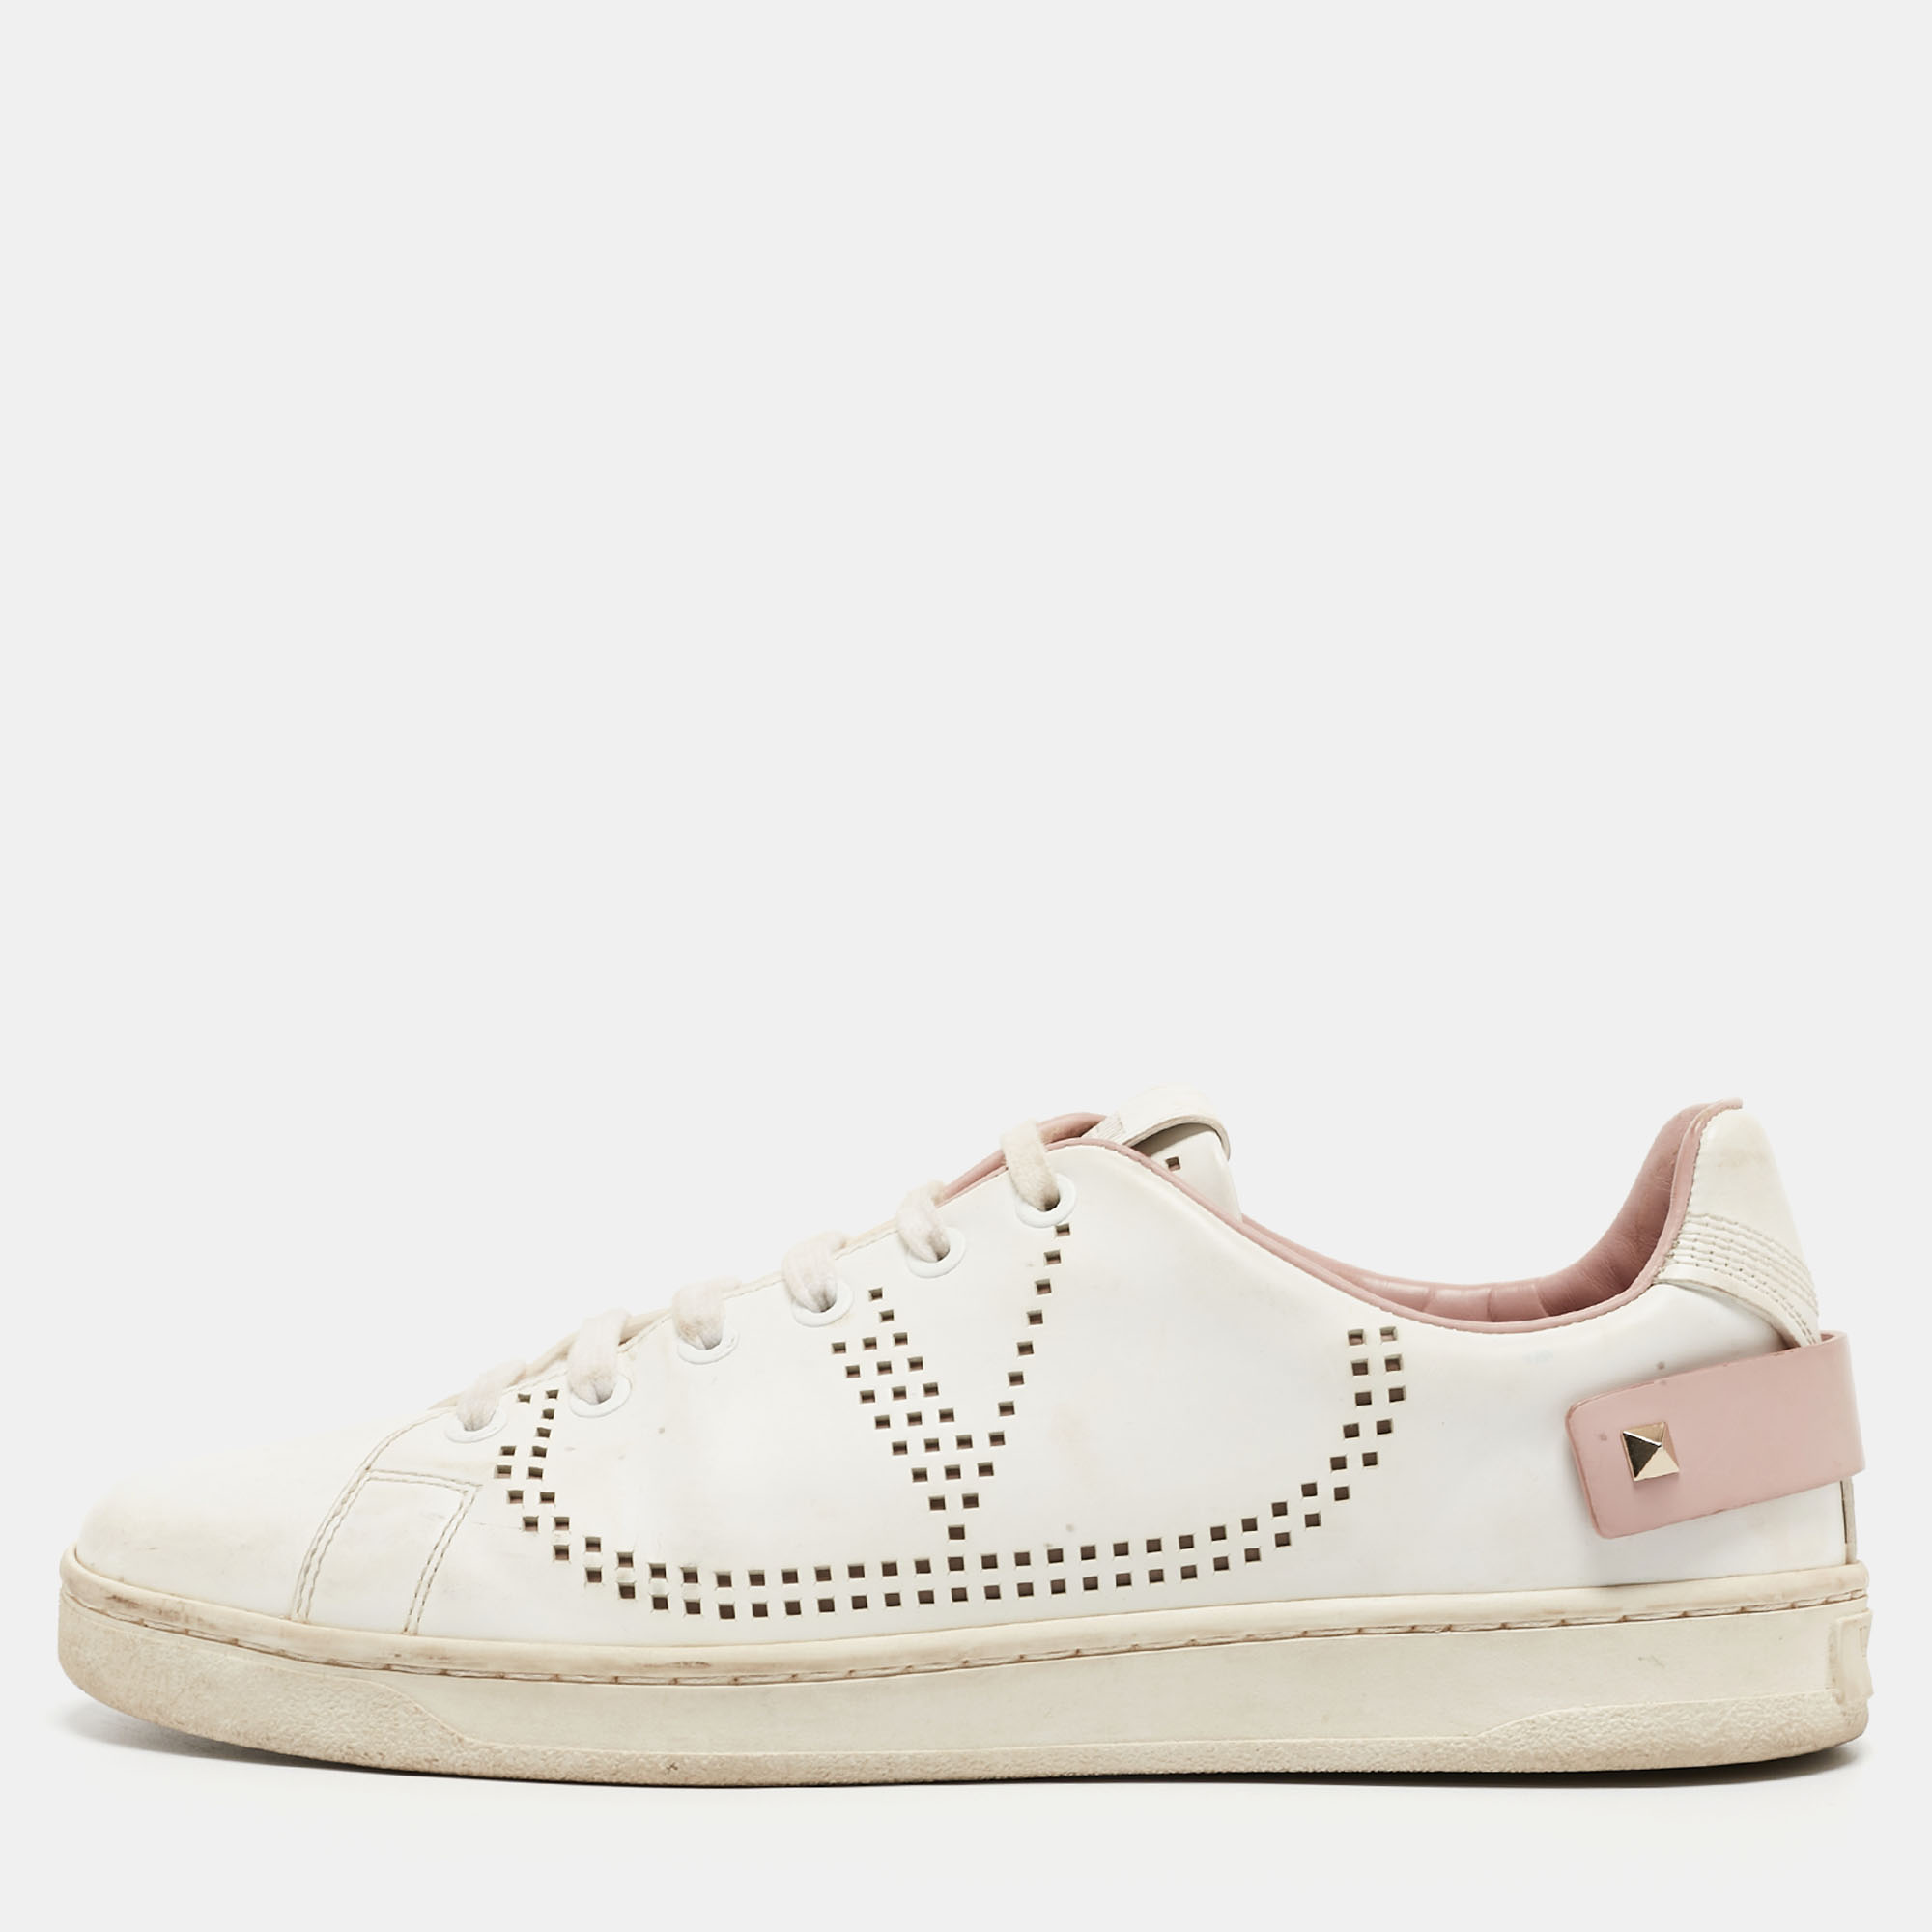 Give your outfit a chic update with this pair of designer sneakers. The creation is sewn perfectly to help you make a statement in them for a long time.